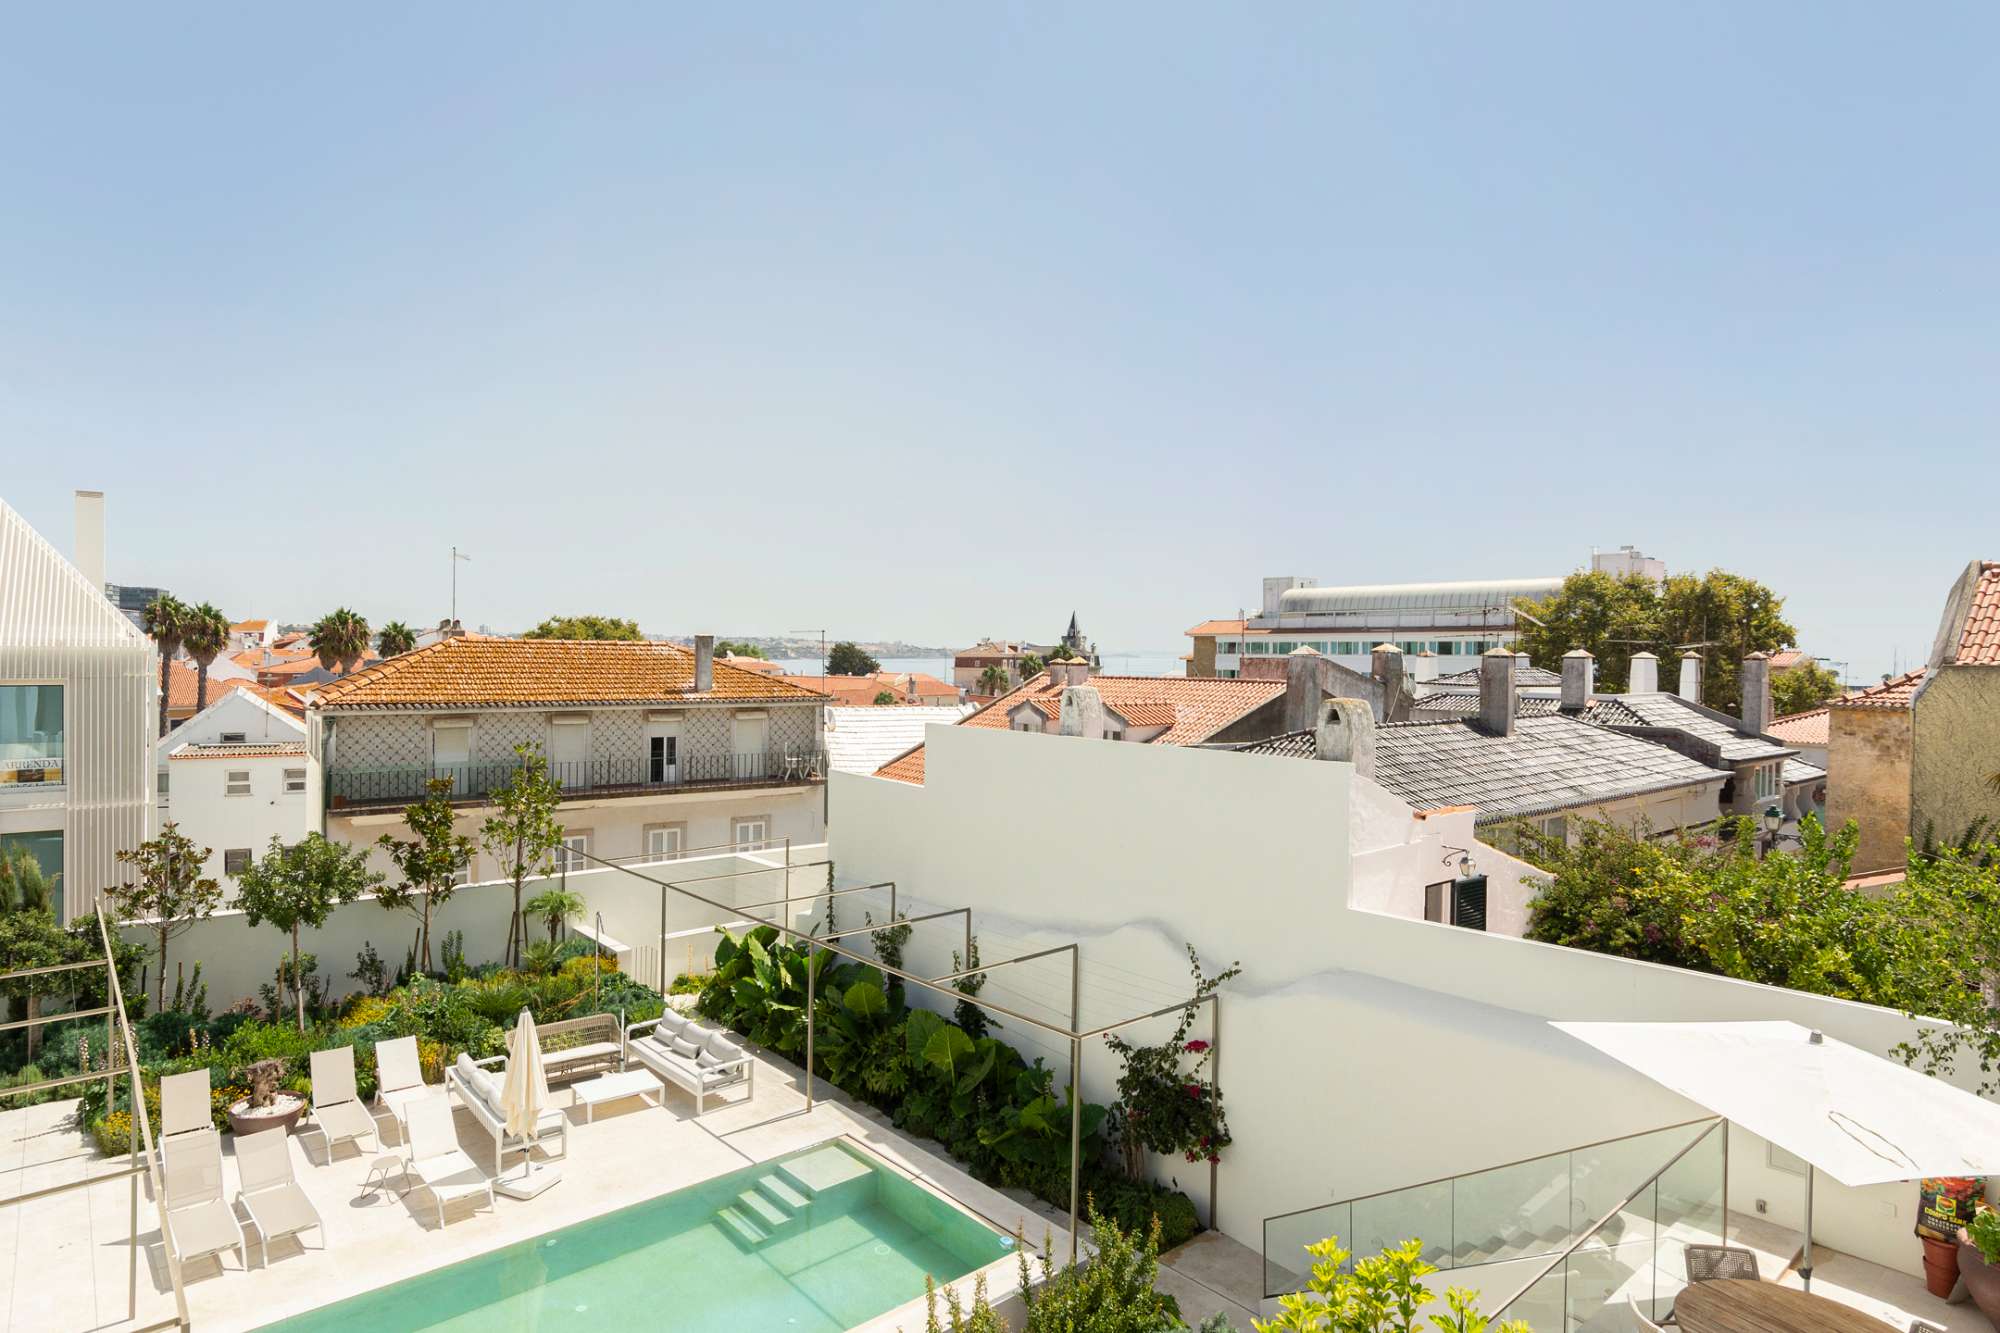 3-bedroom apartment in a private condominium with a swimming pool and garden in Cascais